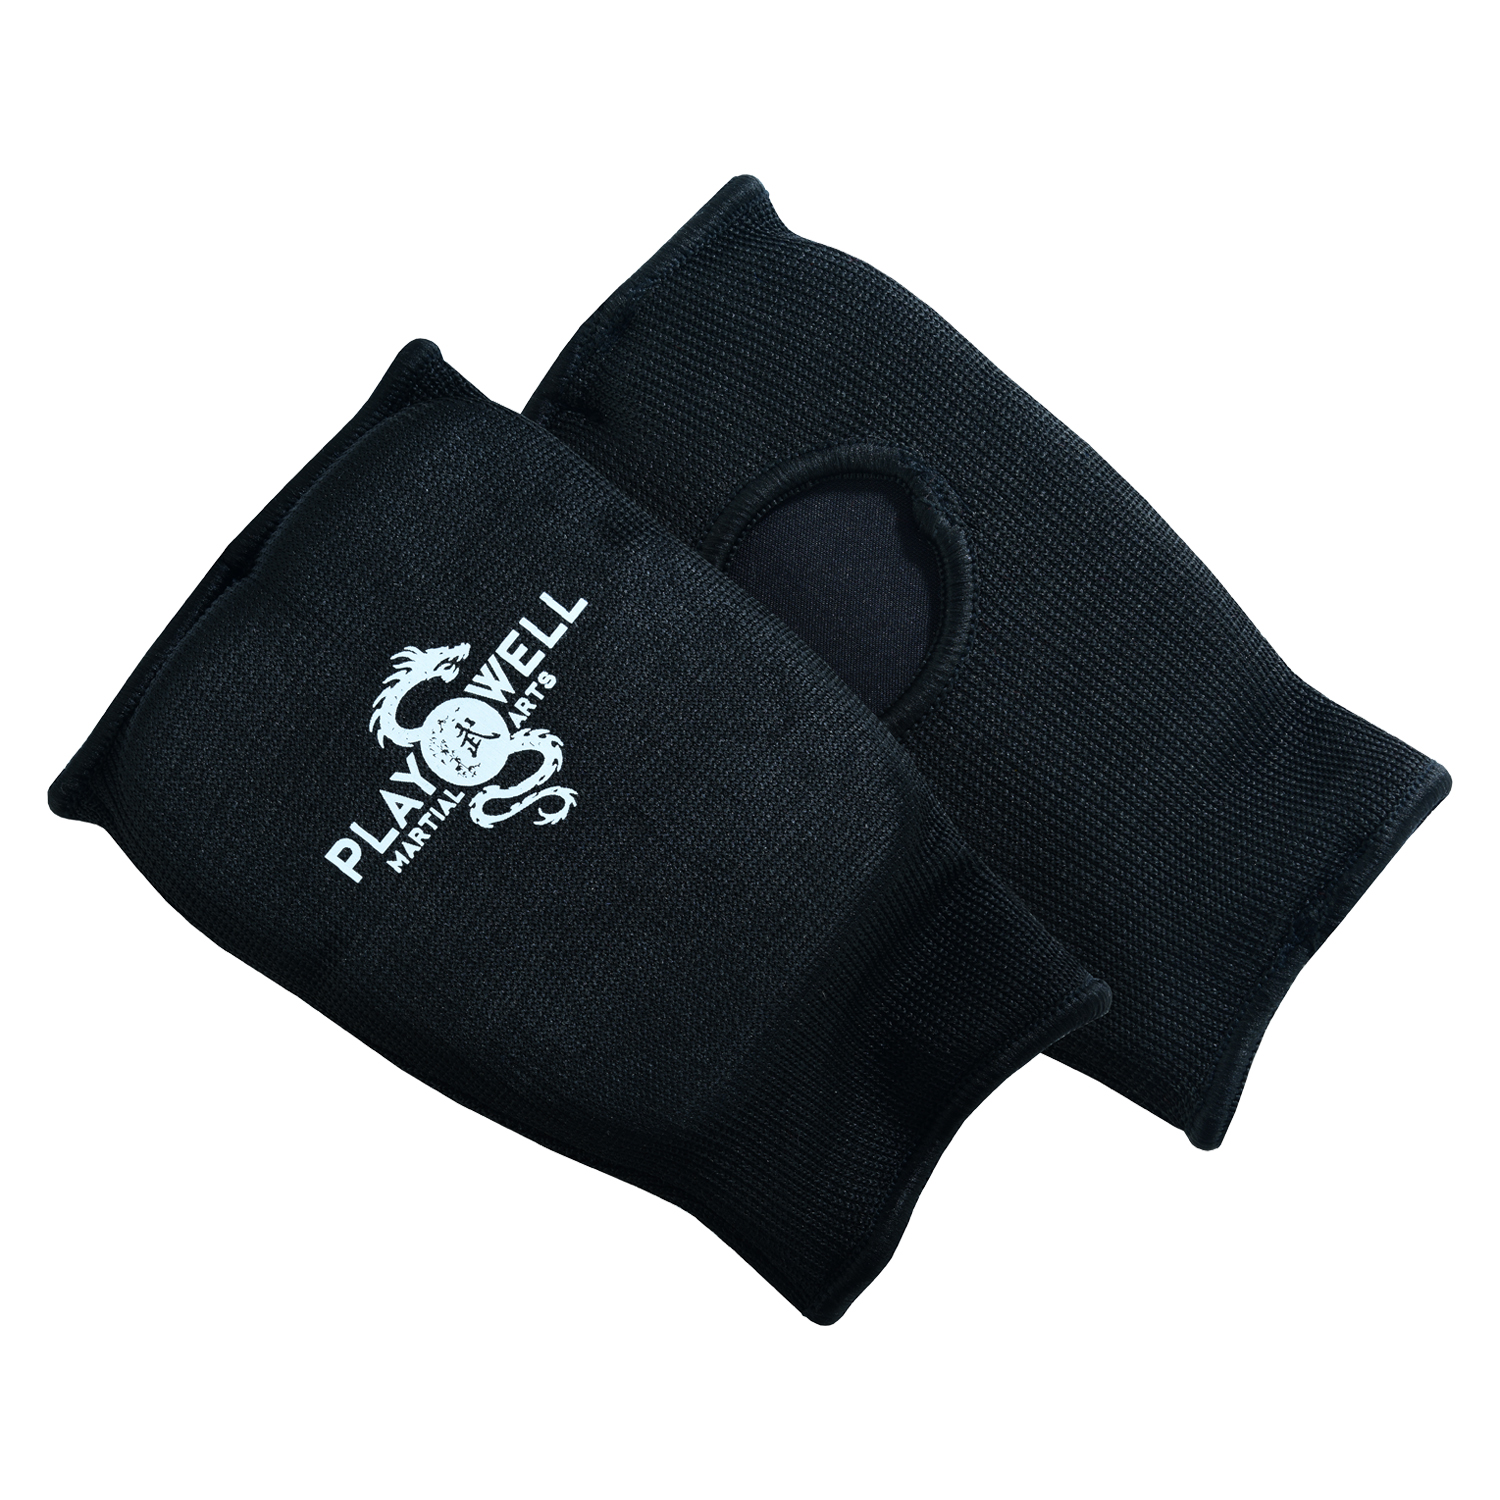 Elasticated Hand Mitts Black: Sparring Mitts - Click Image to Close